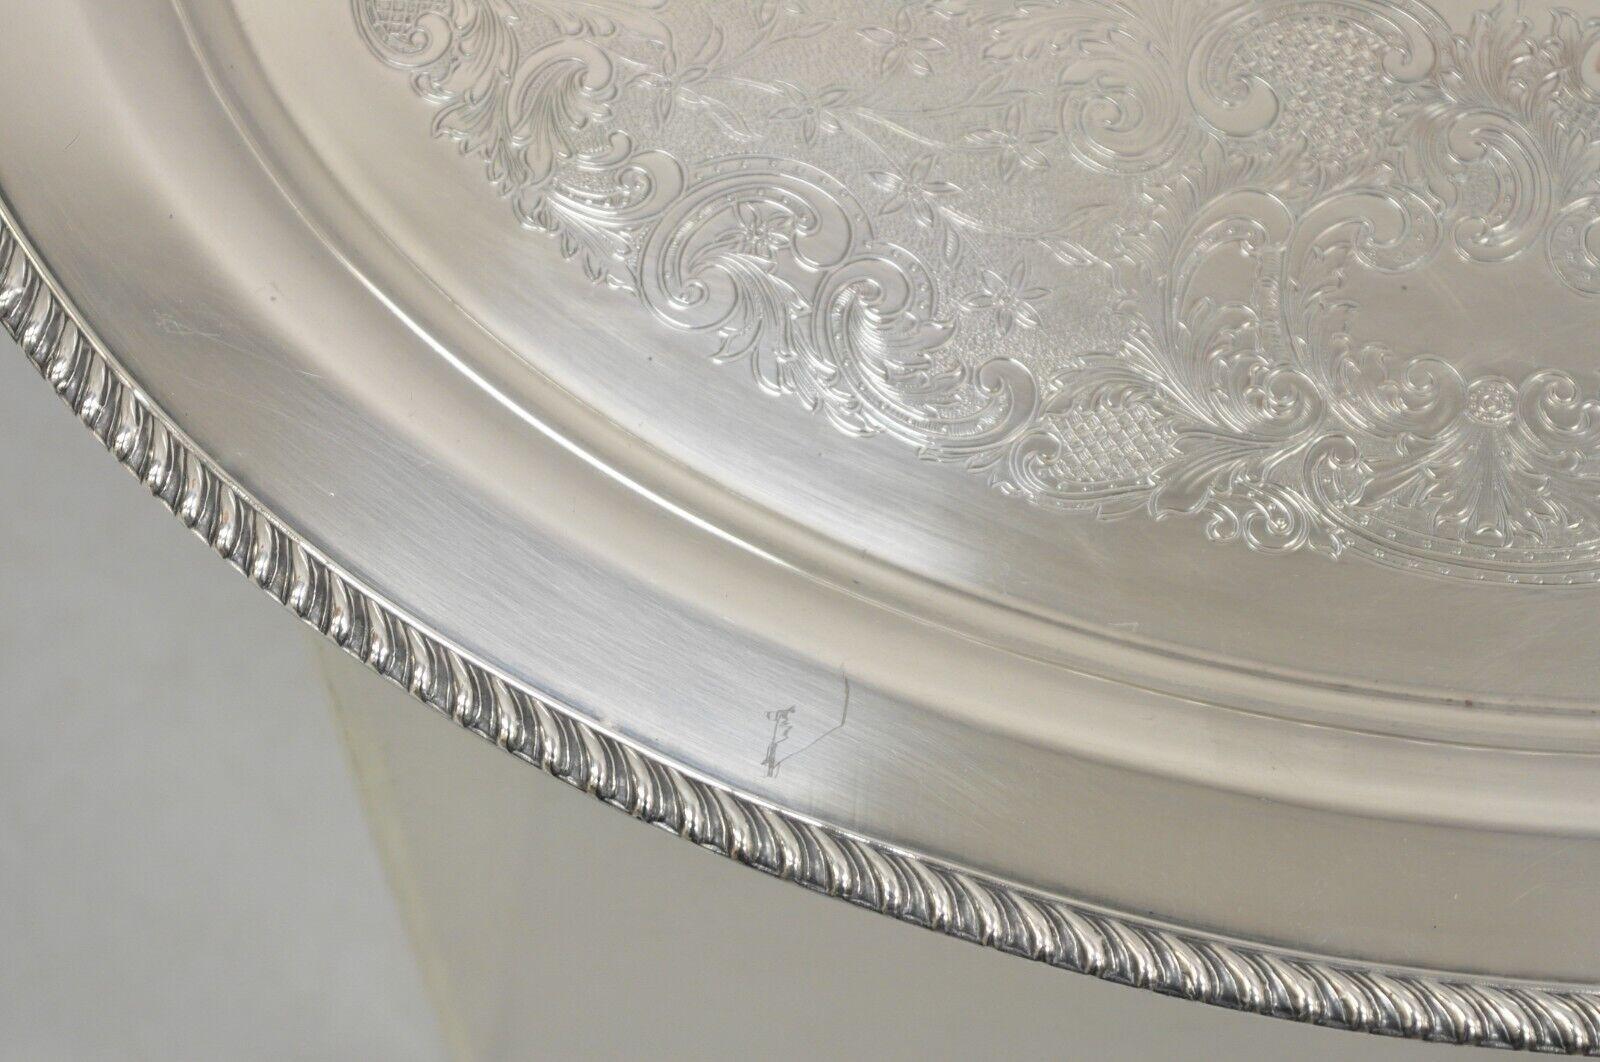 20th Century Vtg English Victorian Large Oval Silver Plated Serving Platter Tray by Victoria For Sale